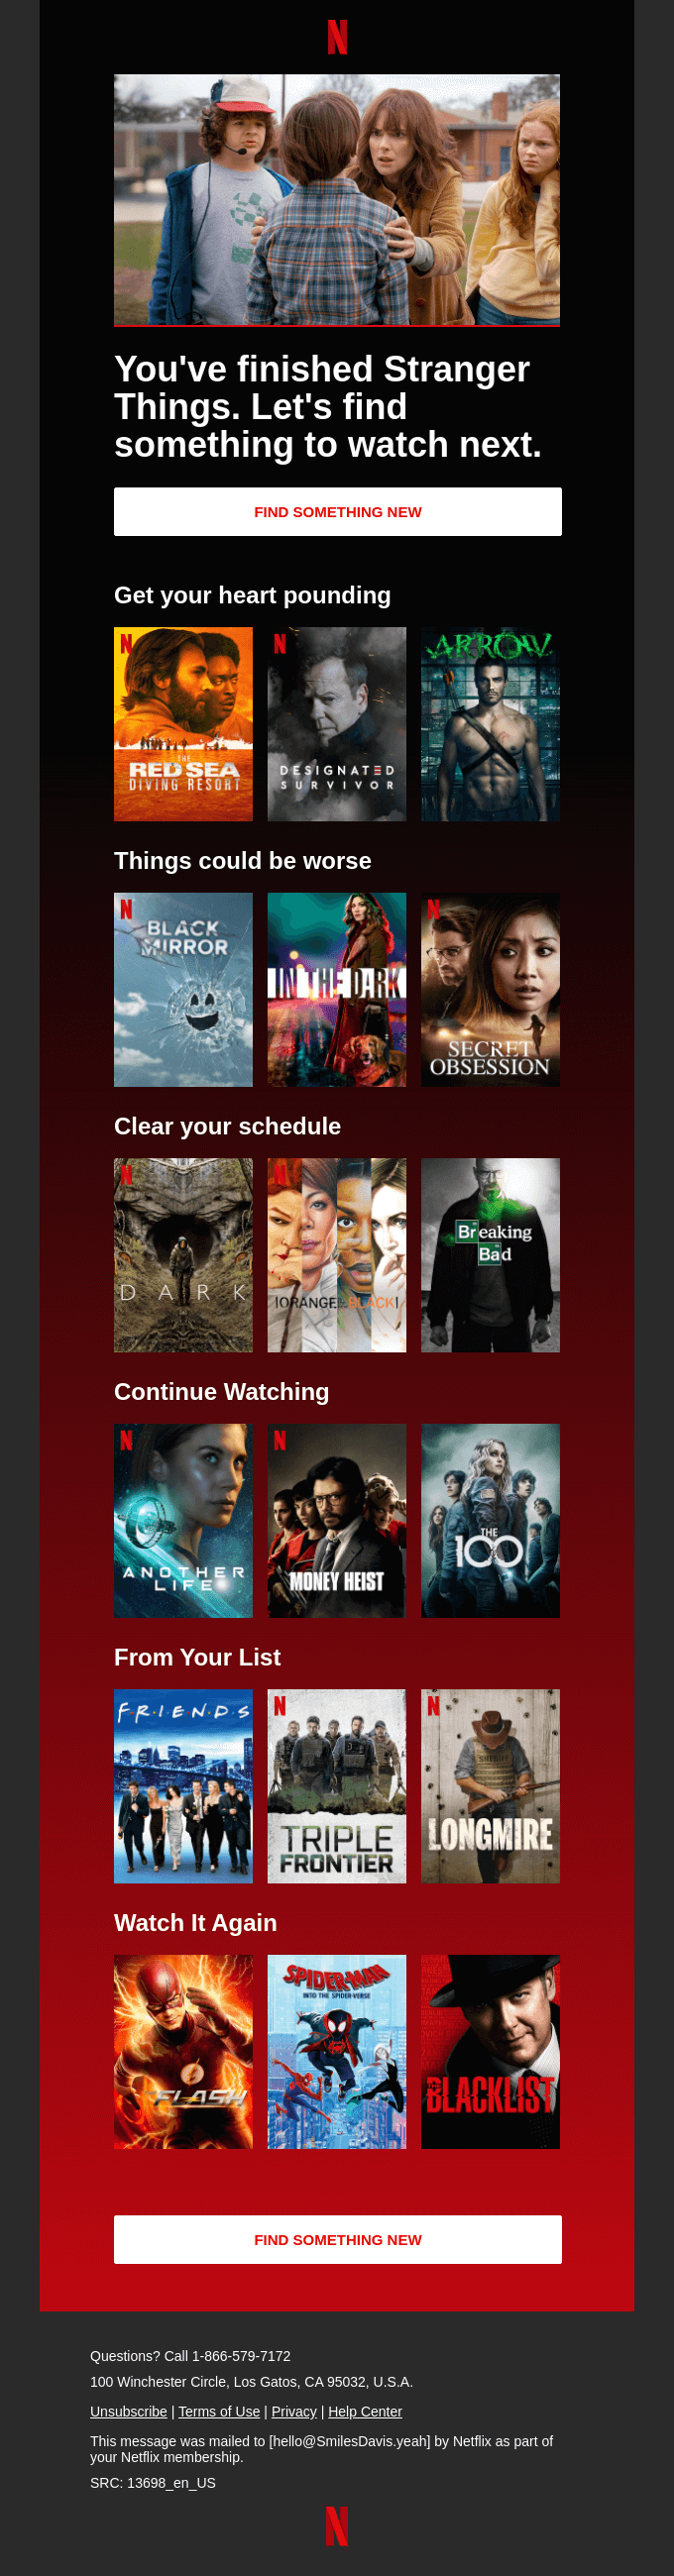 netflix recommendations customer experience